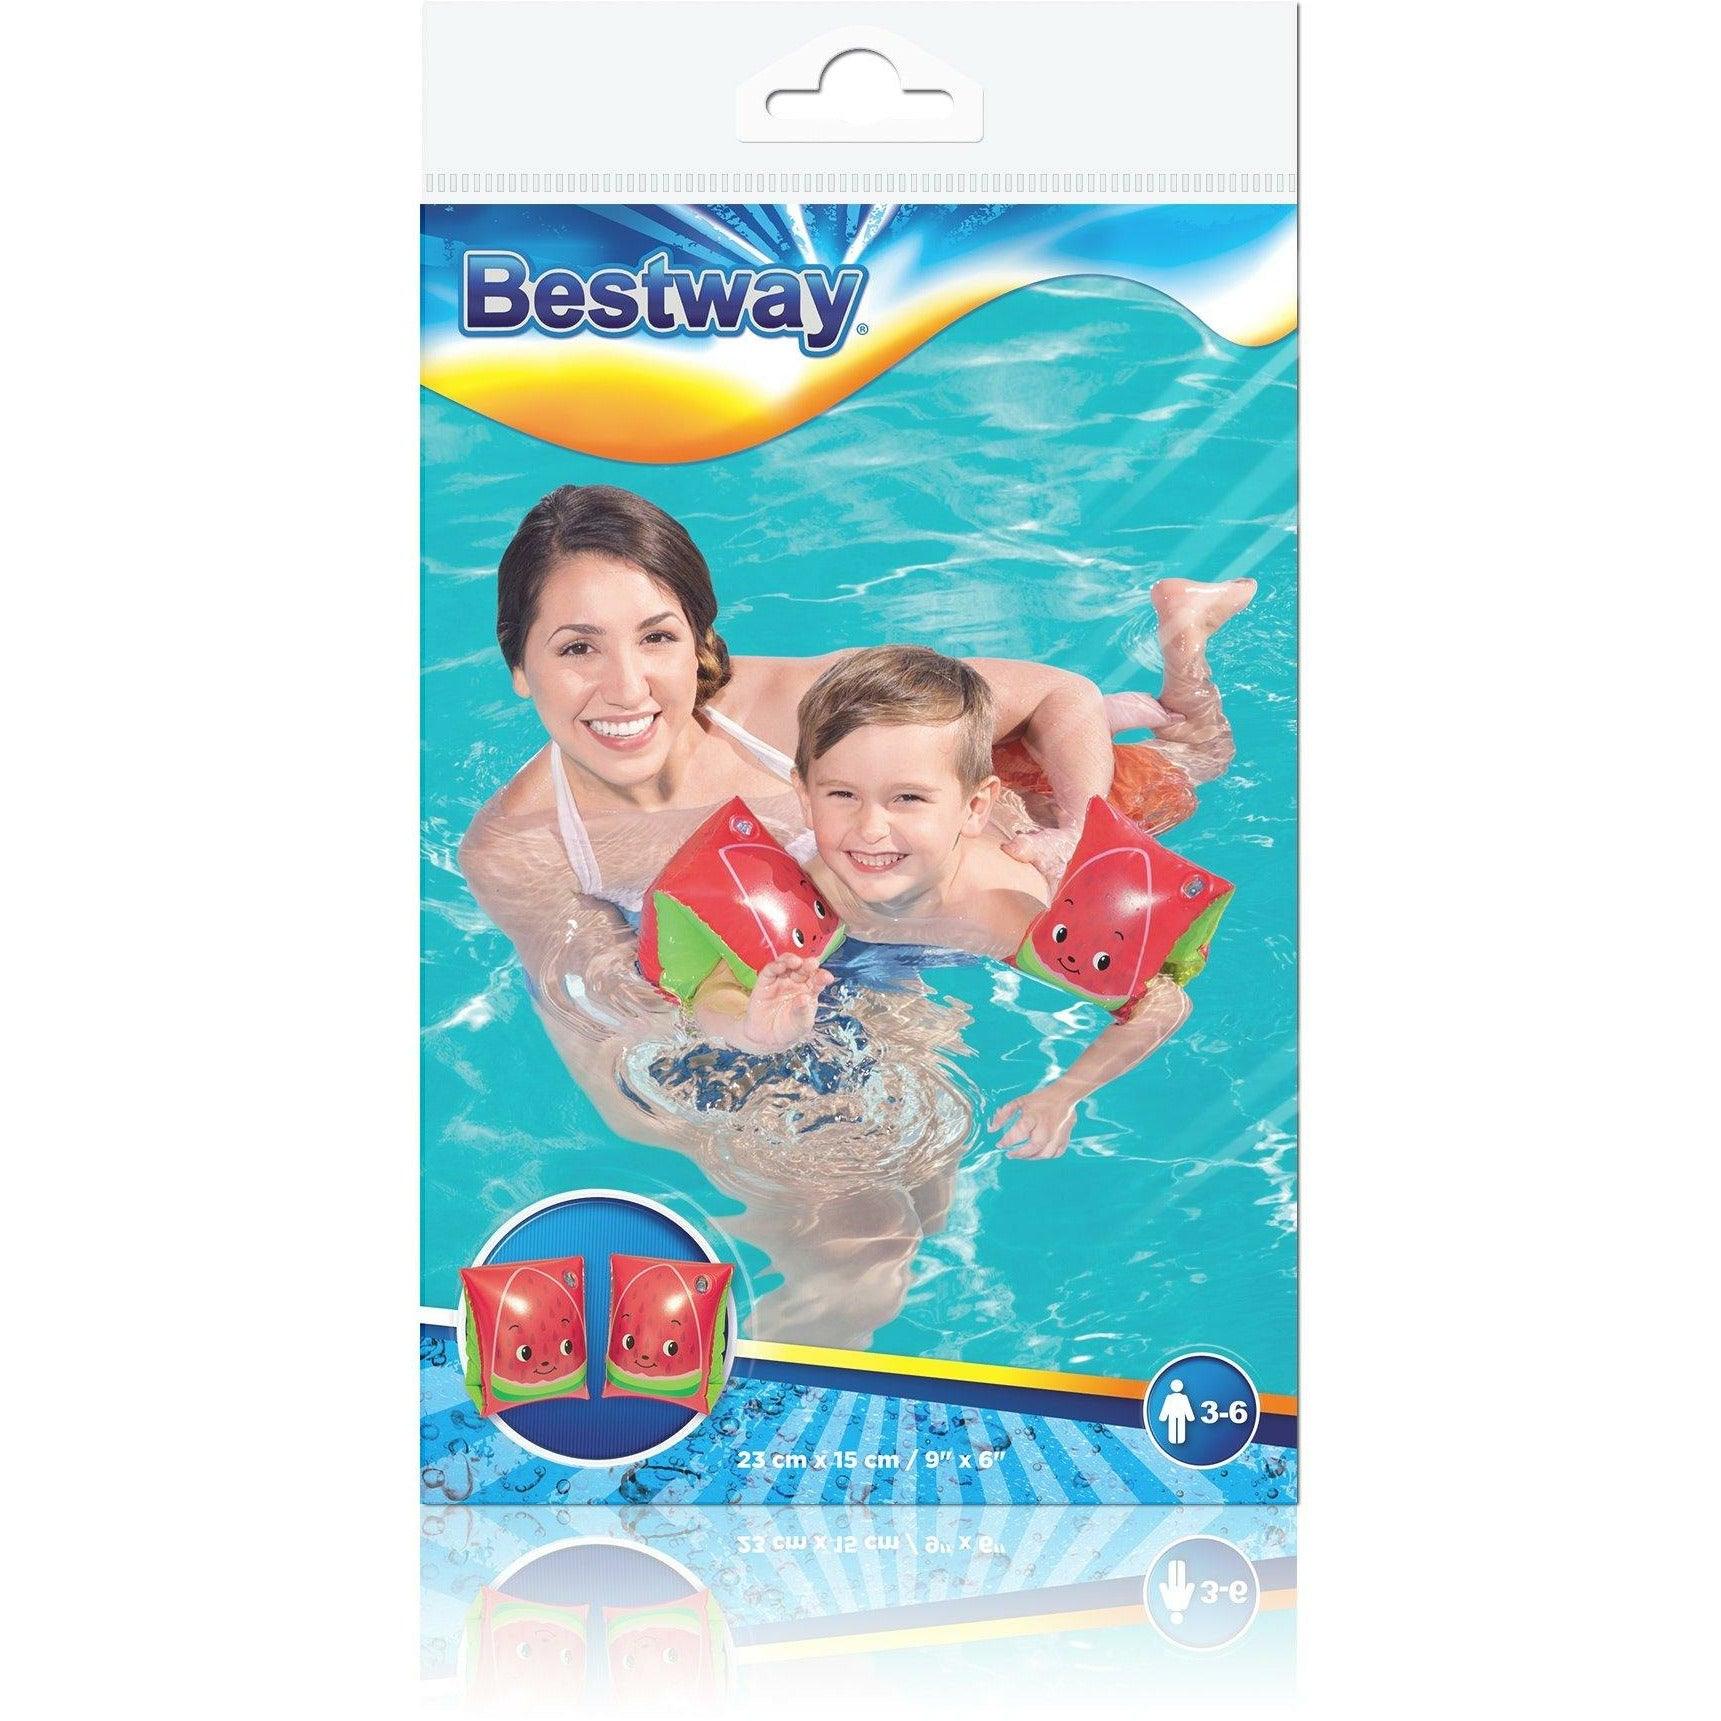 Bestway 32042 Inflatable sleeves 23cm x 15cm - Red - BumbleToys - 5-7 Years, Boys, Eagle Plus, Floaters, Girls, Inflatables, Sand Toys Pools & Inflatables